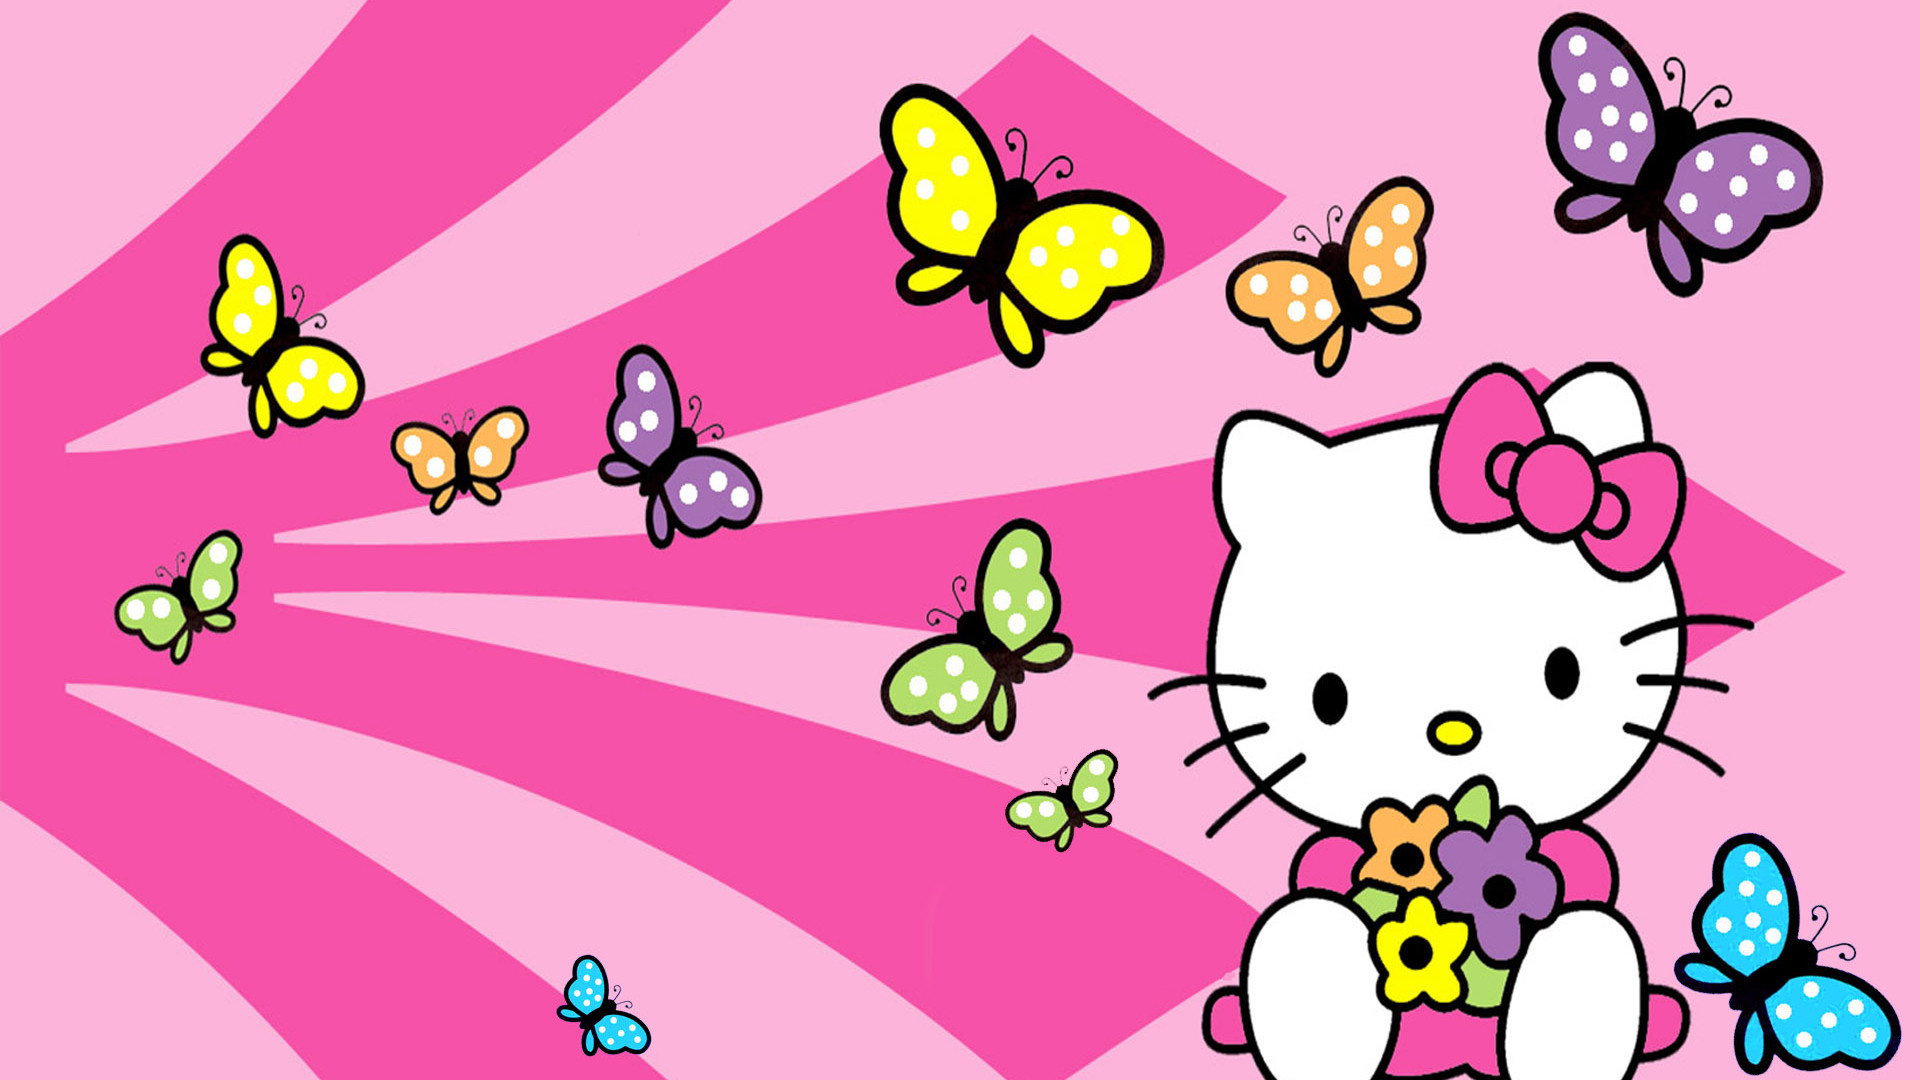 Hello Kitty: Has been the subject of various parody works, such as the "Hello Cthulhu" comic strip. 1920x1080 Full HD Wallpaper.